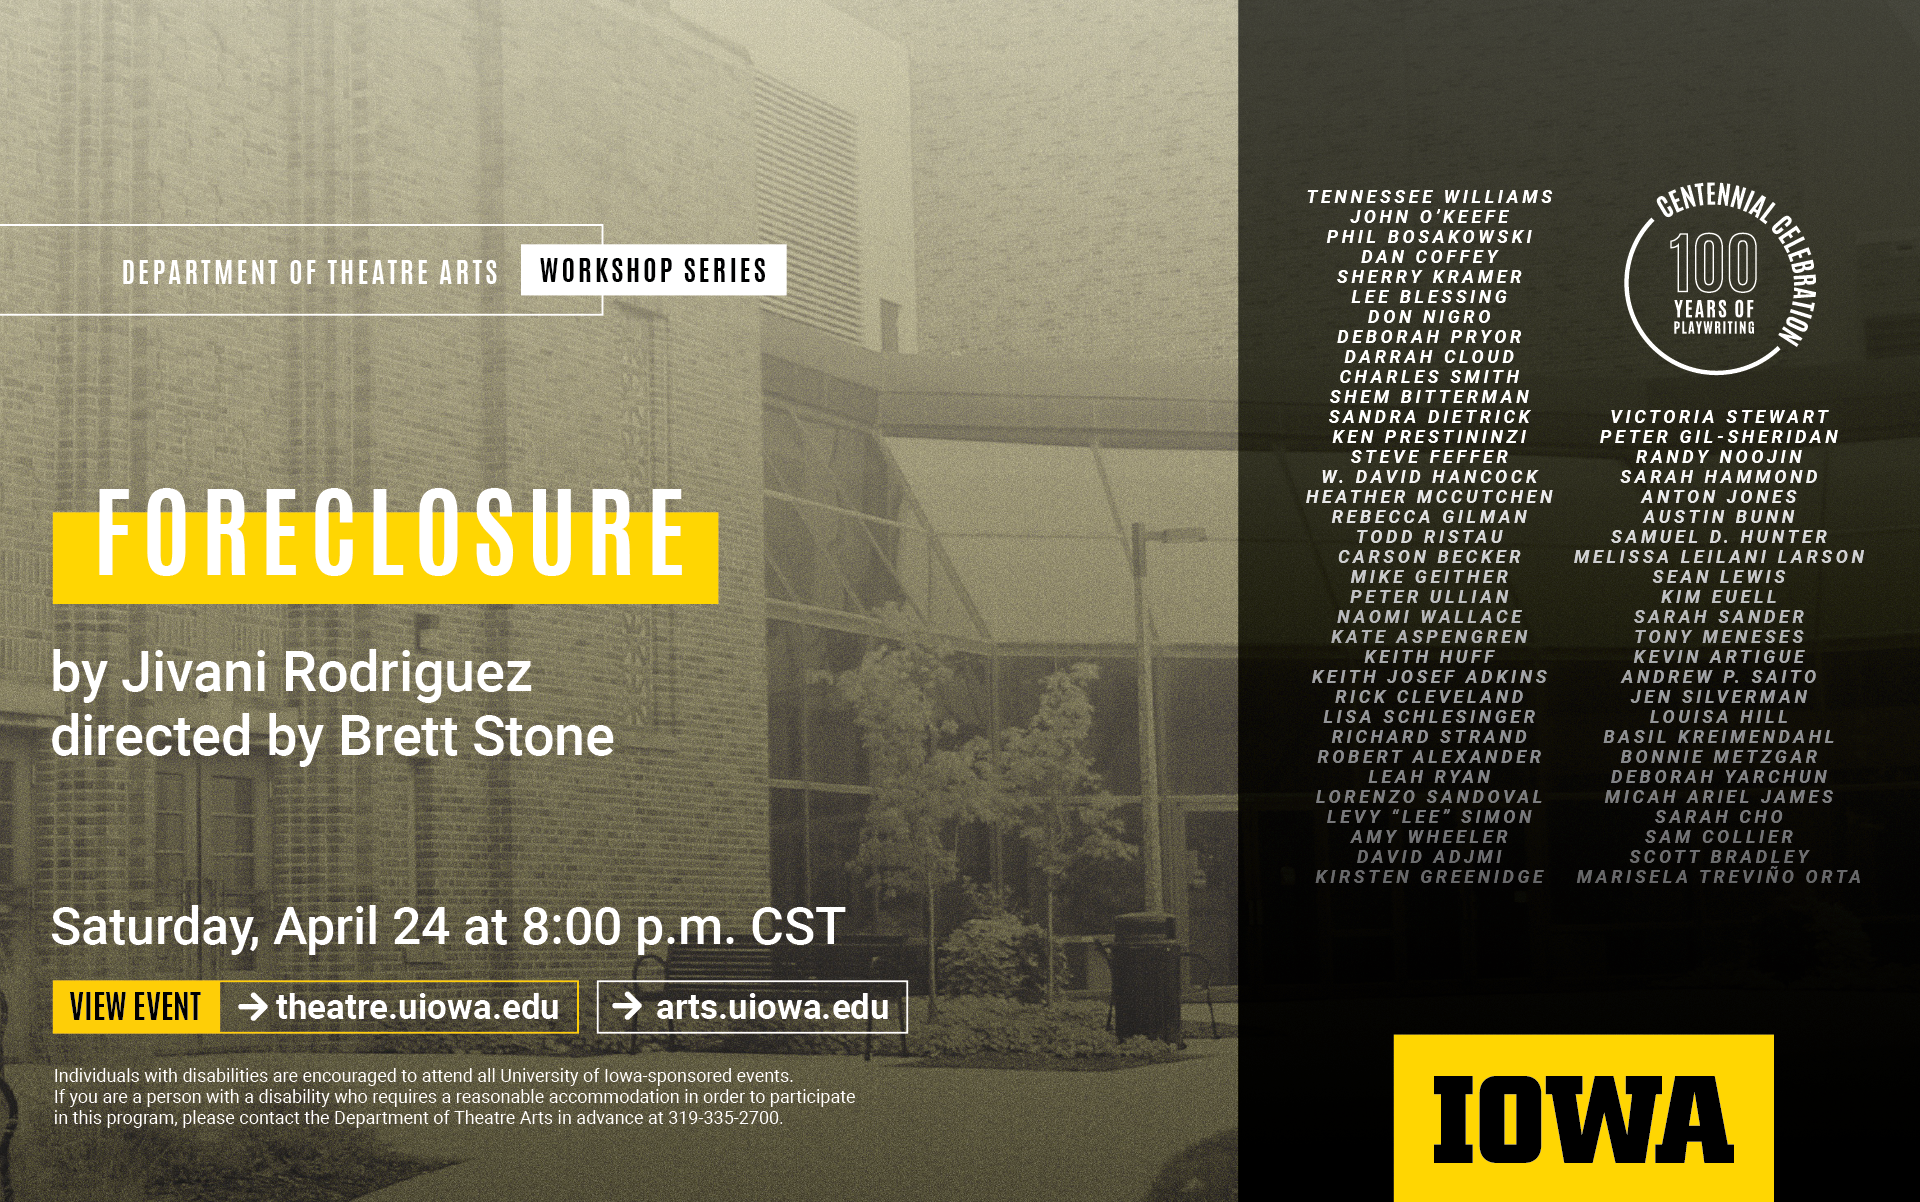 foreclosure. by Jivani Rodriguez. directed by Brett Stone. Saturday, April 24 at 8:00 p.m. CST. Grey photo of Theatre Building. List of alumni playwrights.